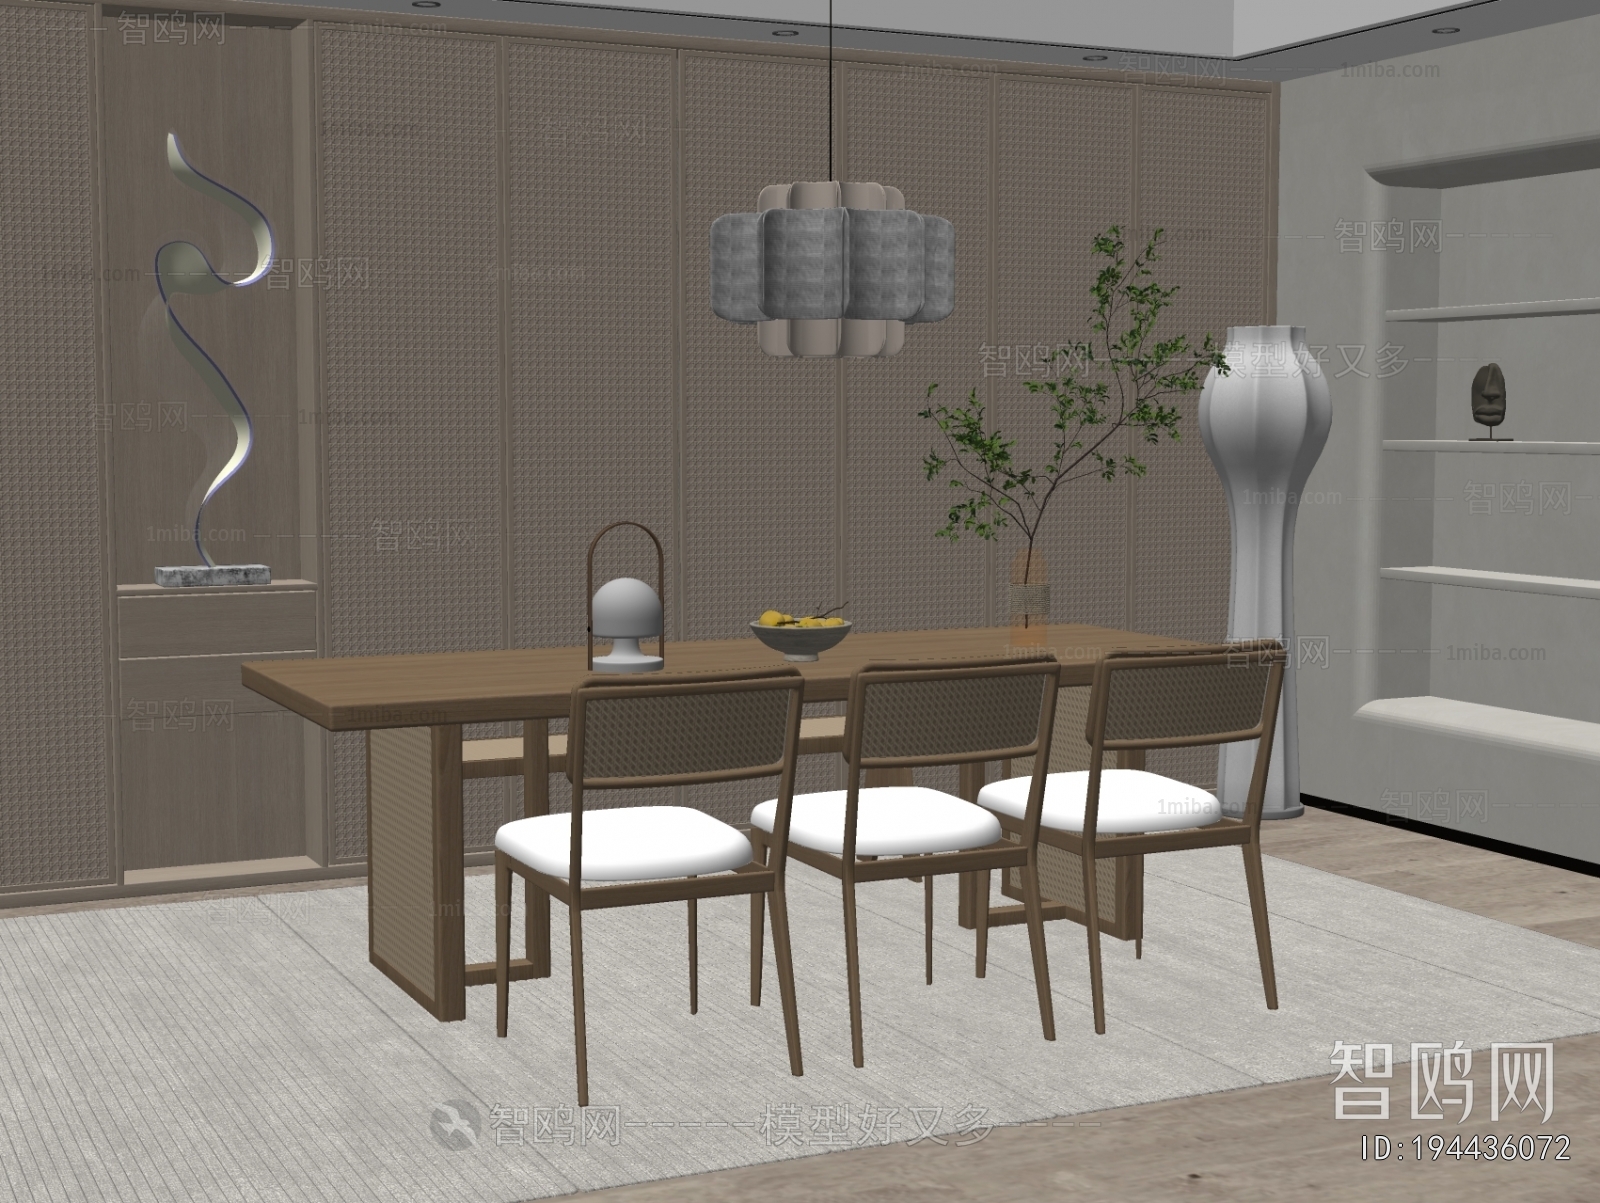 Wabi-sabi Style Dining Table And Chairs